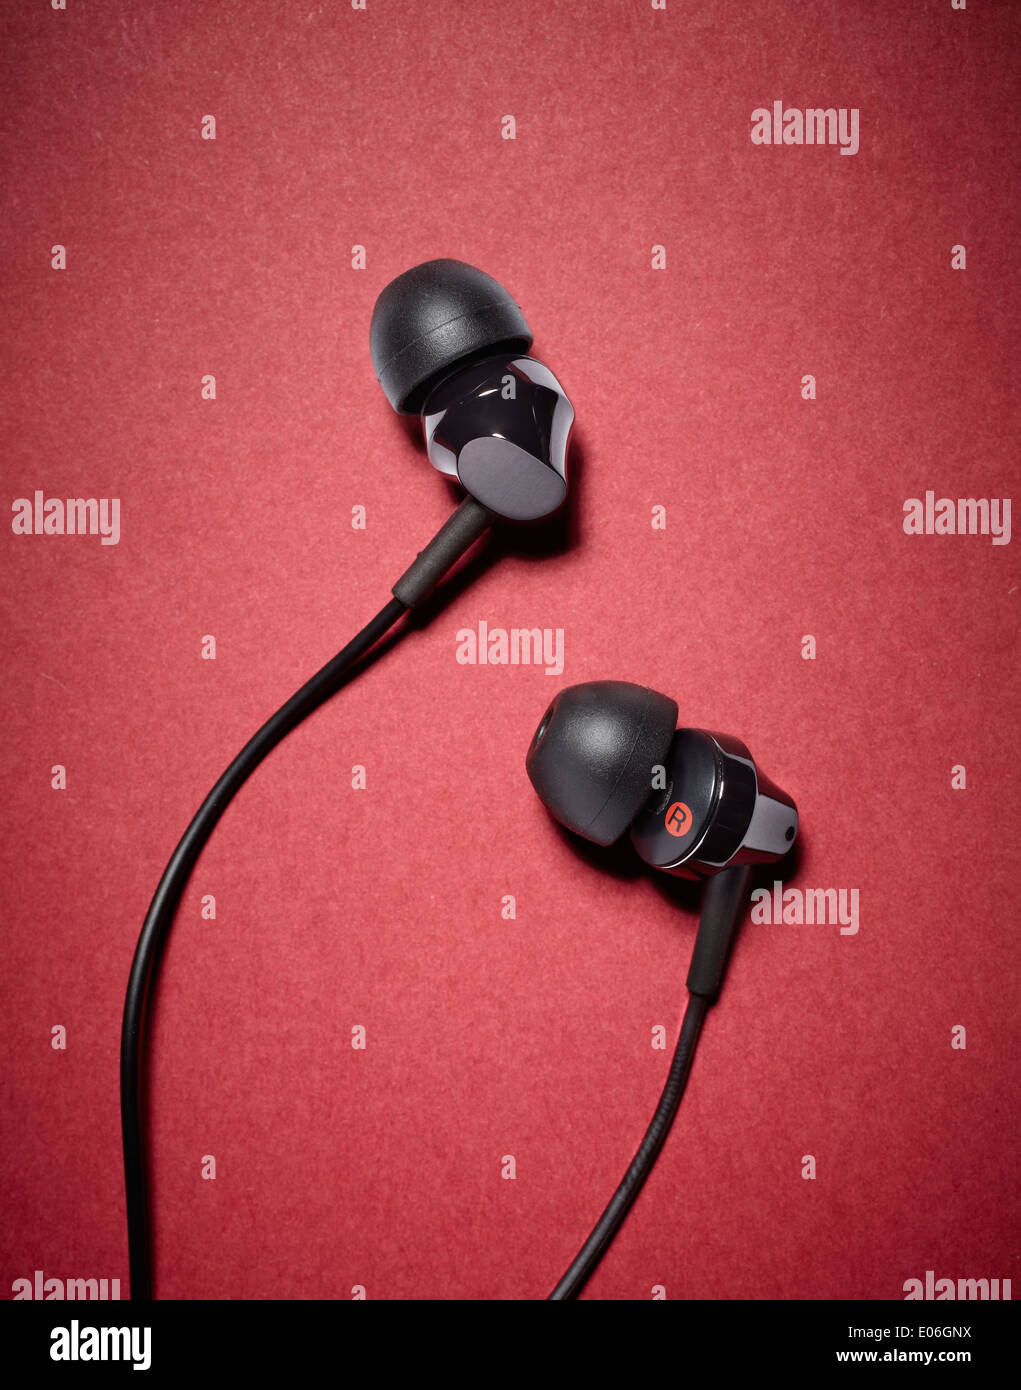 inner ear headphones against a red background Stock Photo